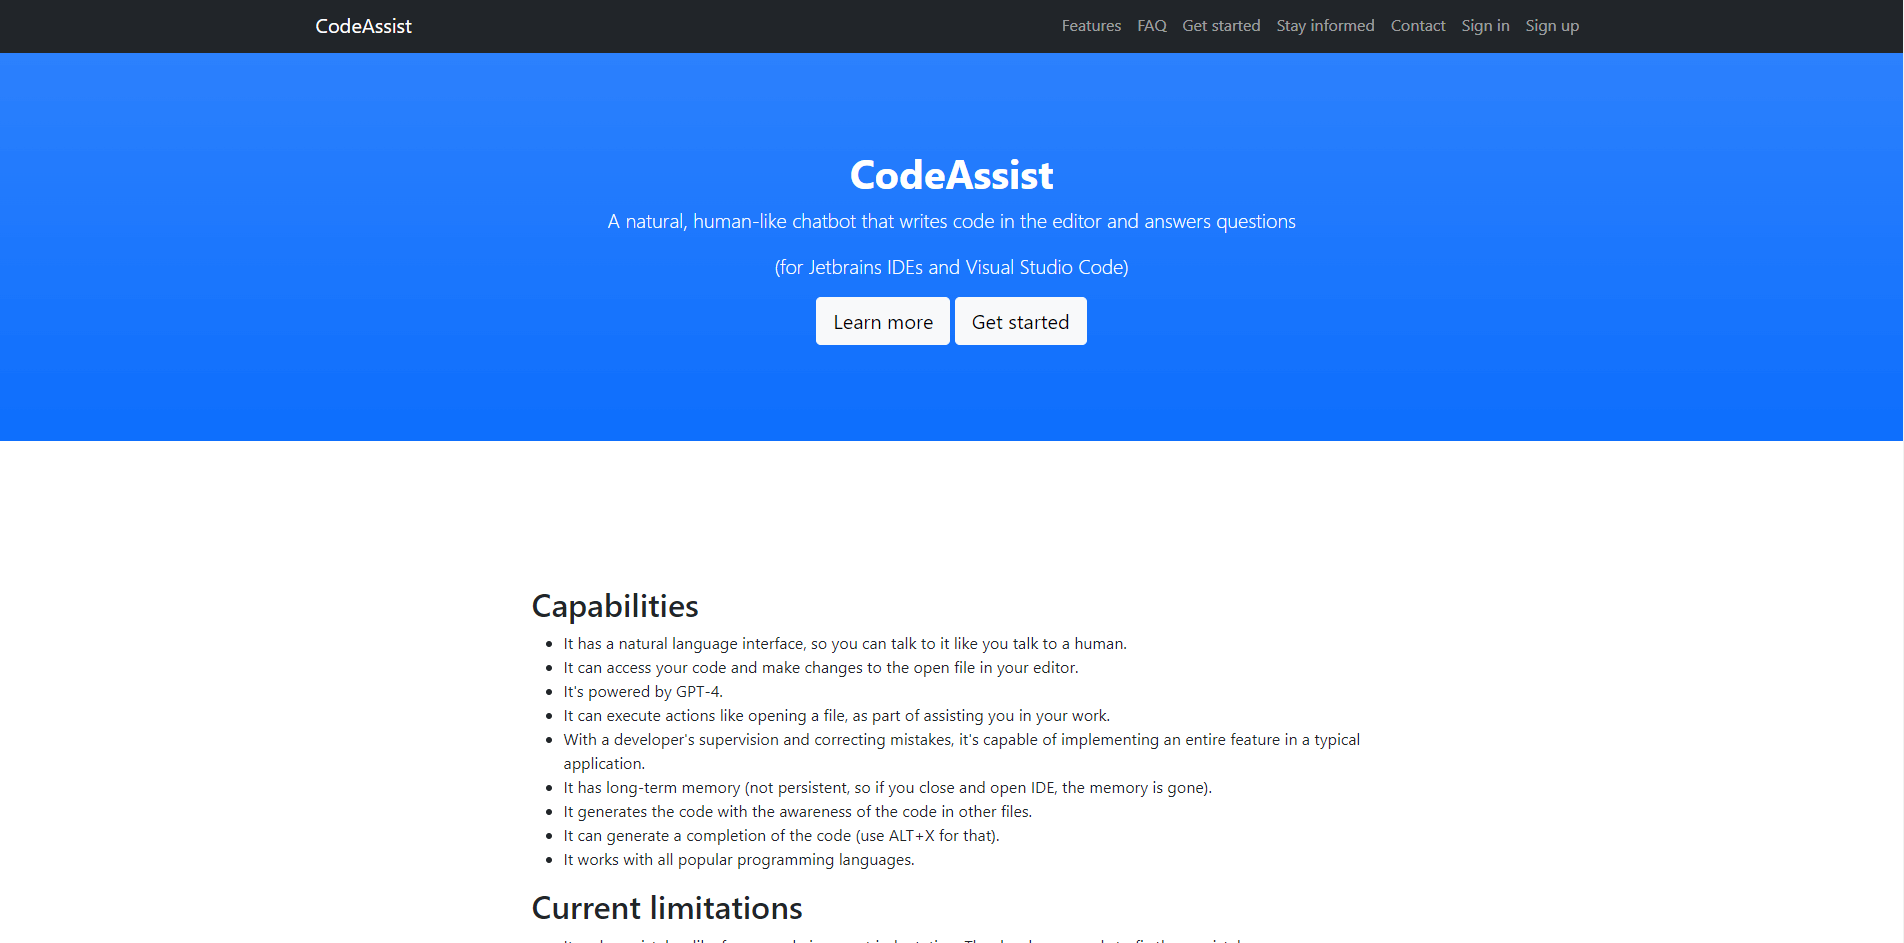 codeassist.tech | A natural, human-like chatbot that writes code in the editor and answers questions